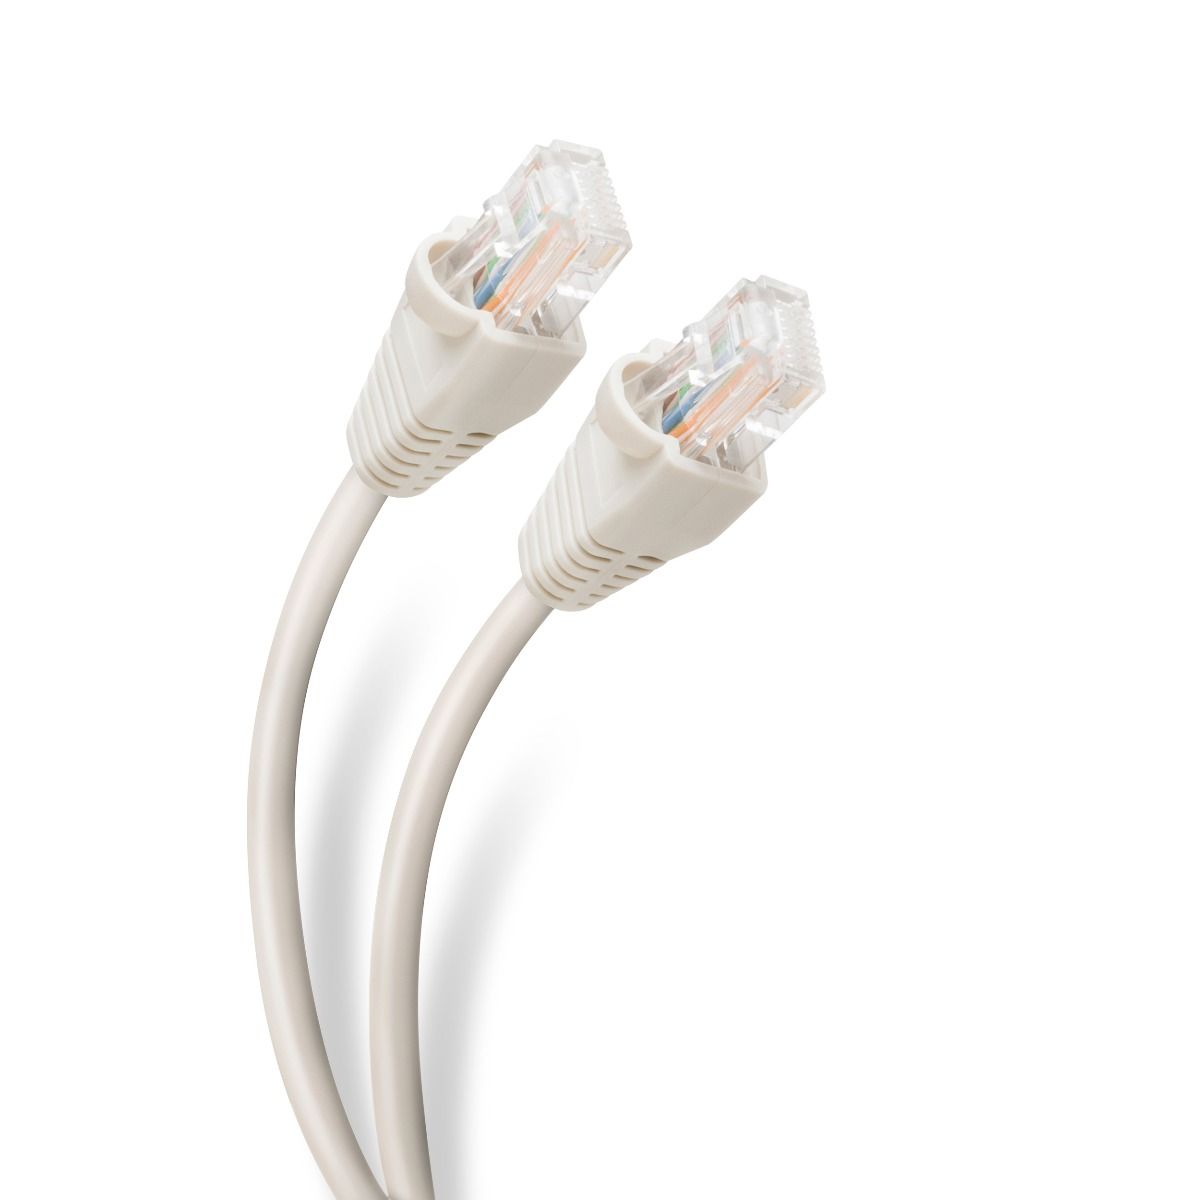 Cable Ethernet 20 Metros